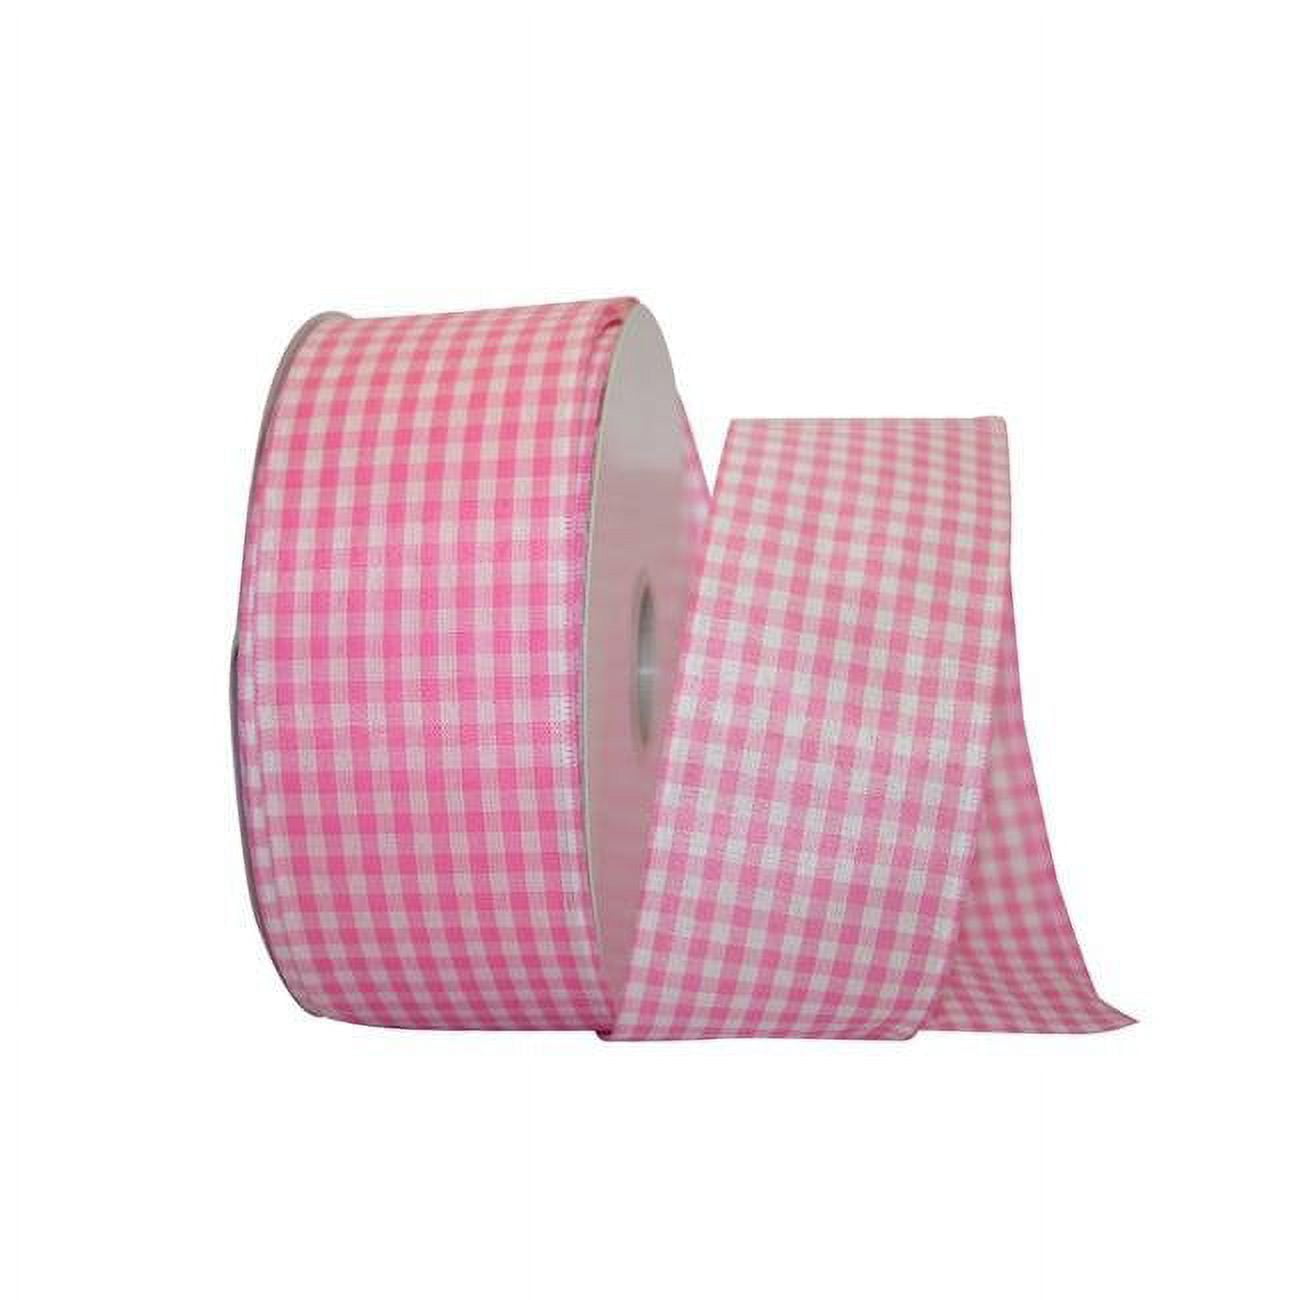 5 yds 7/8 or 1.5 Hot Pink and White Gingham Grosgrain Ribbon